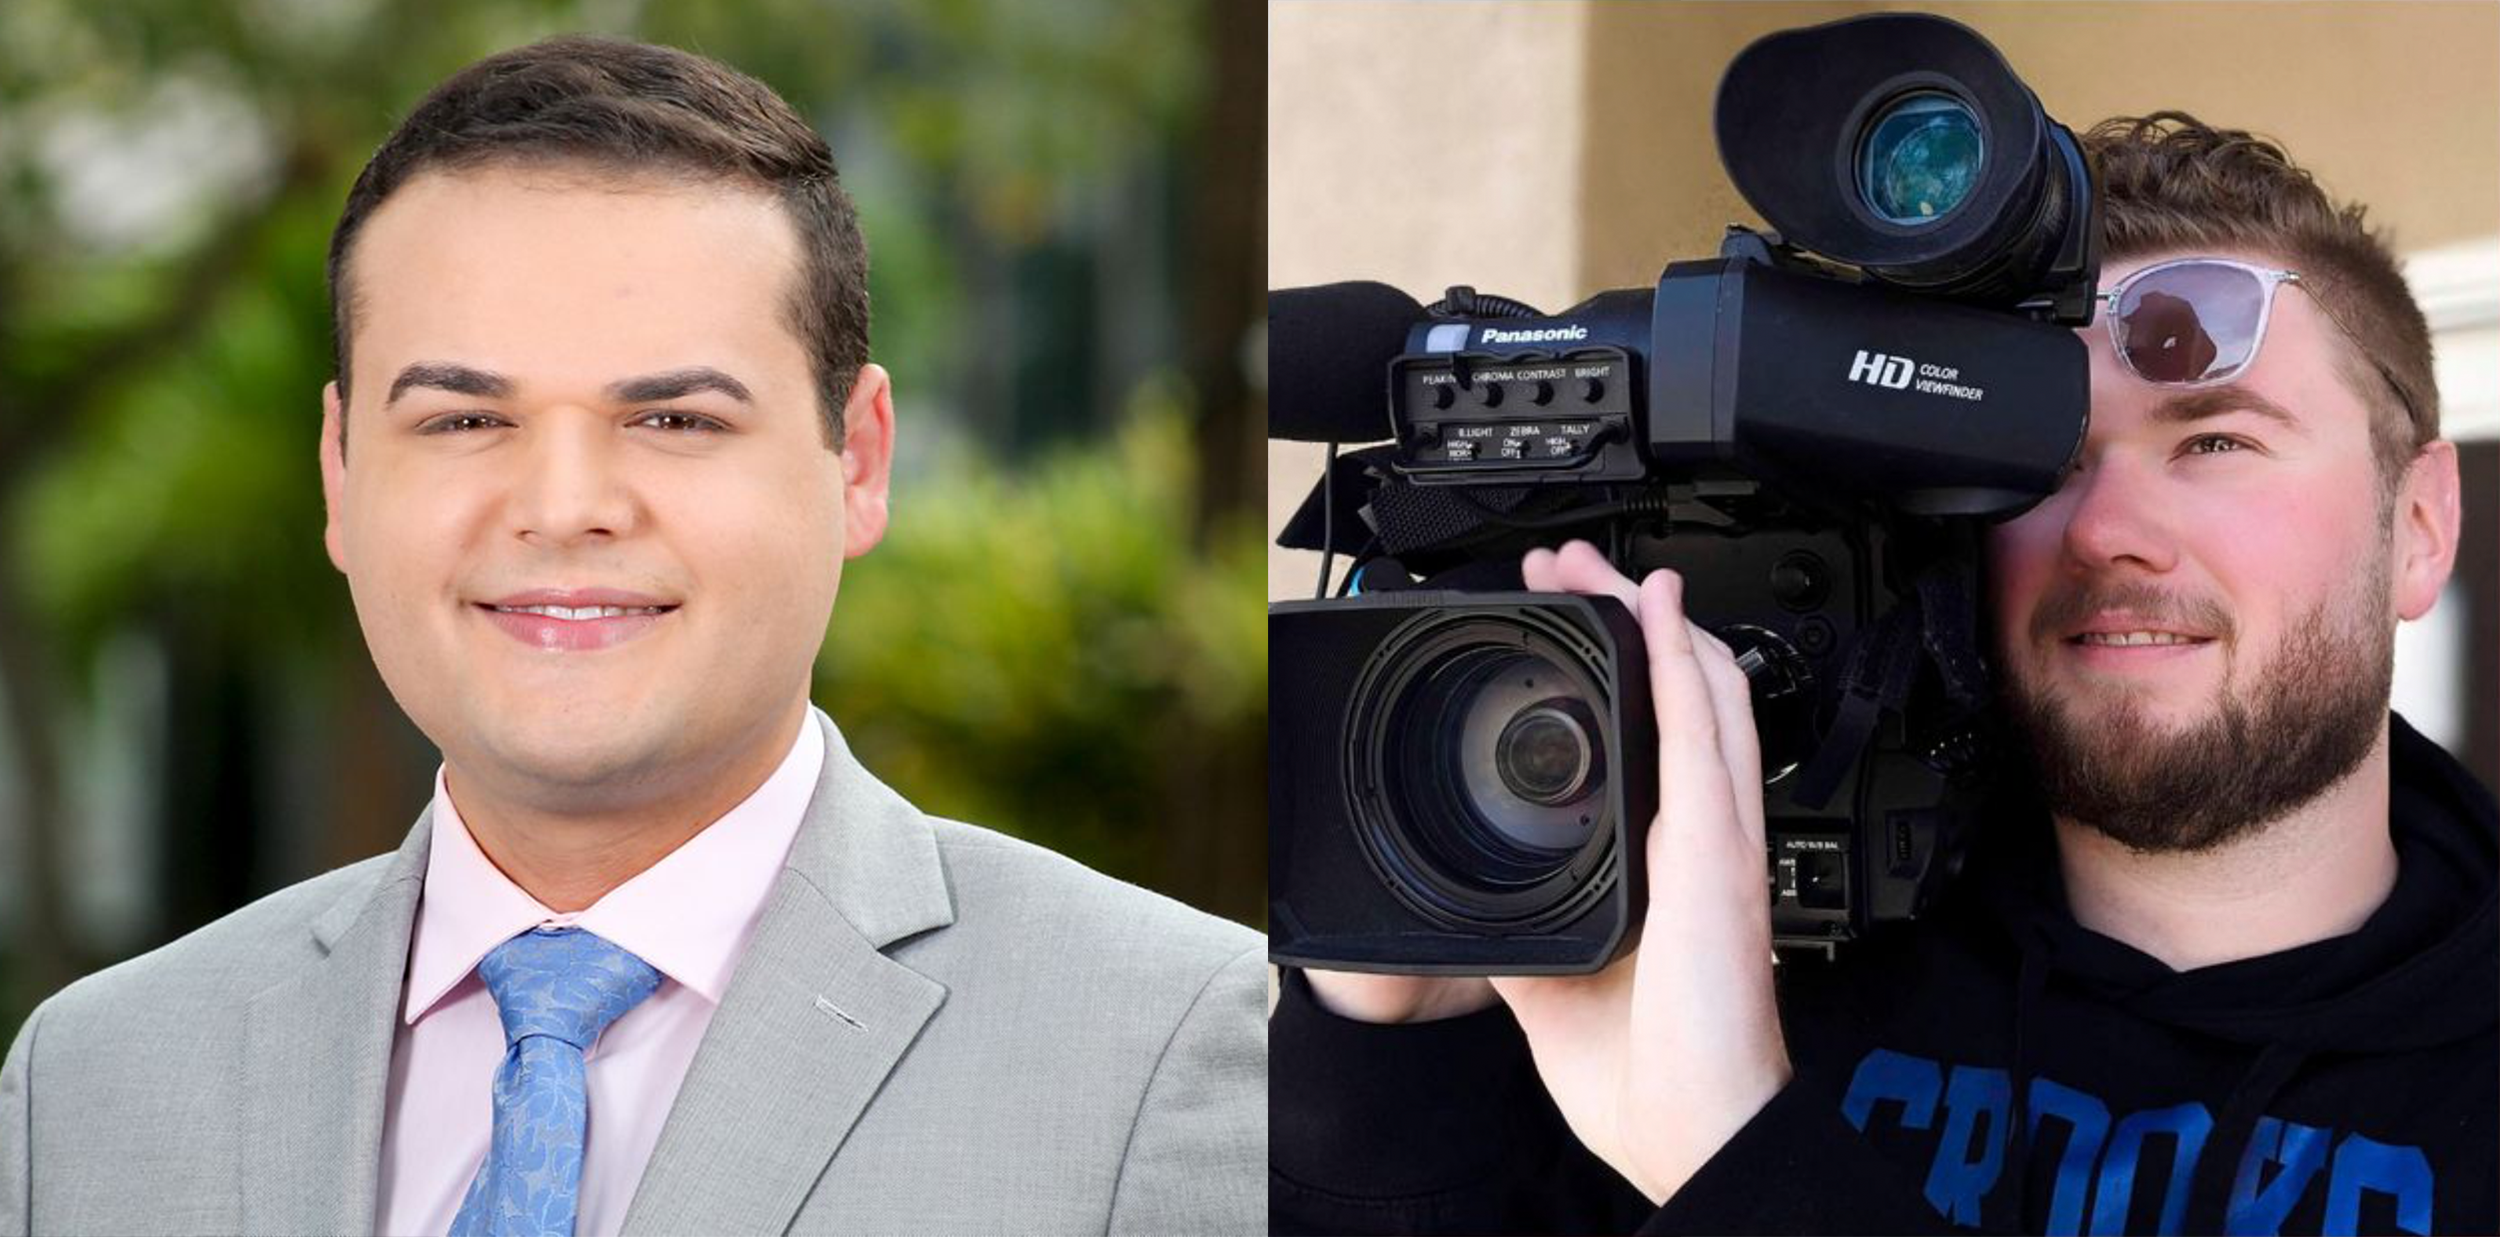 Journalist Dylan Lyons Shot To Death In Orlando: 24-Year-Old Reporter Killed In Orlando shooting